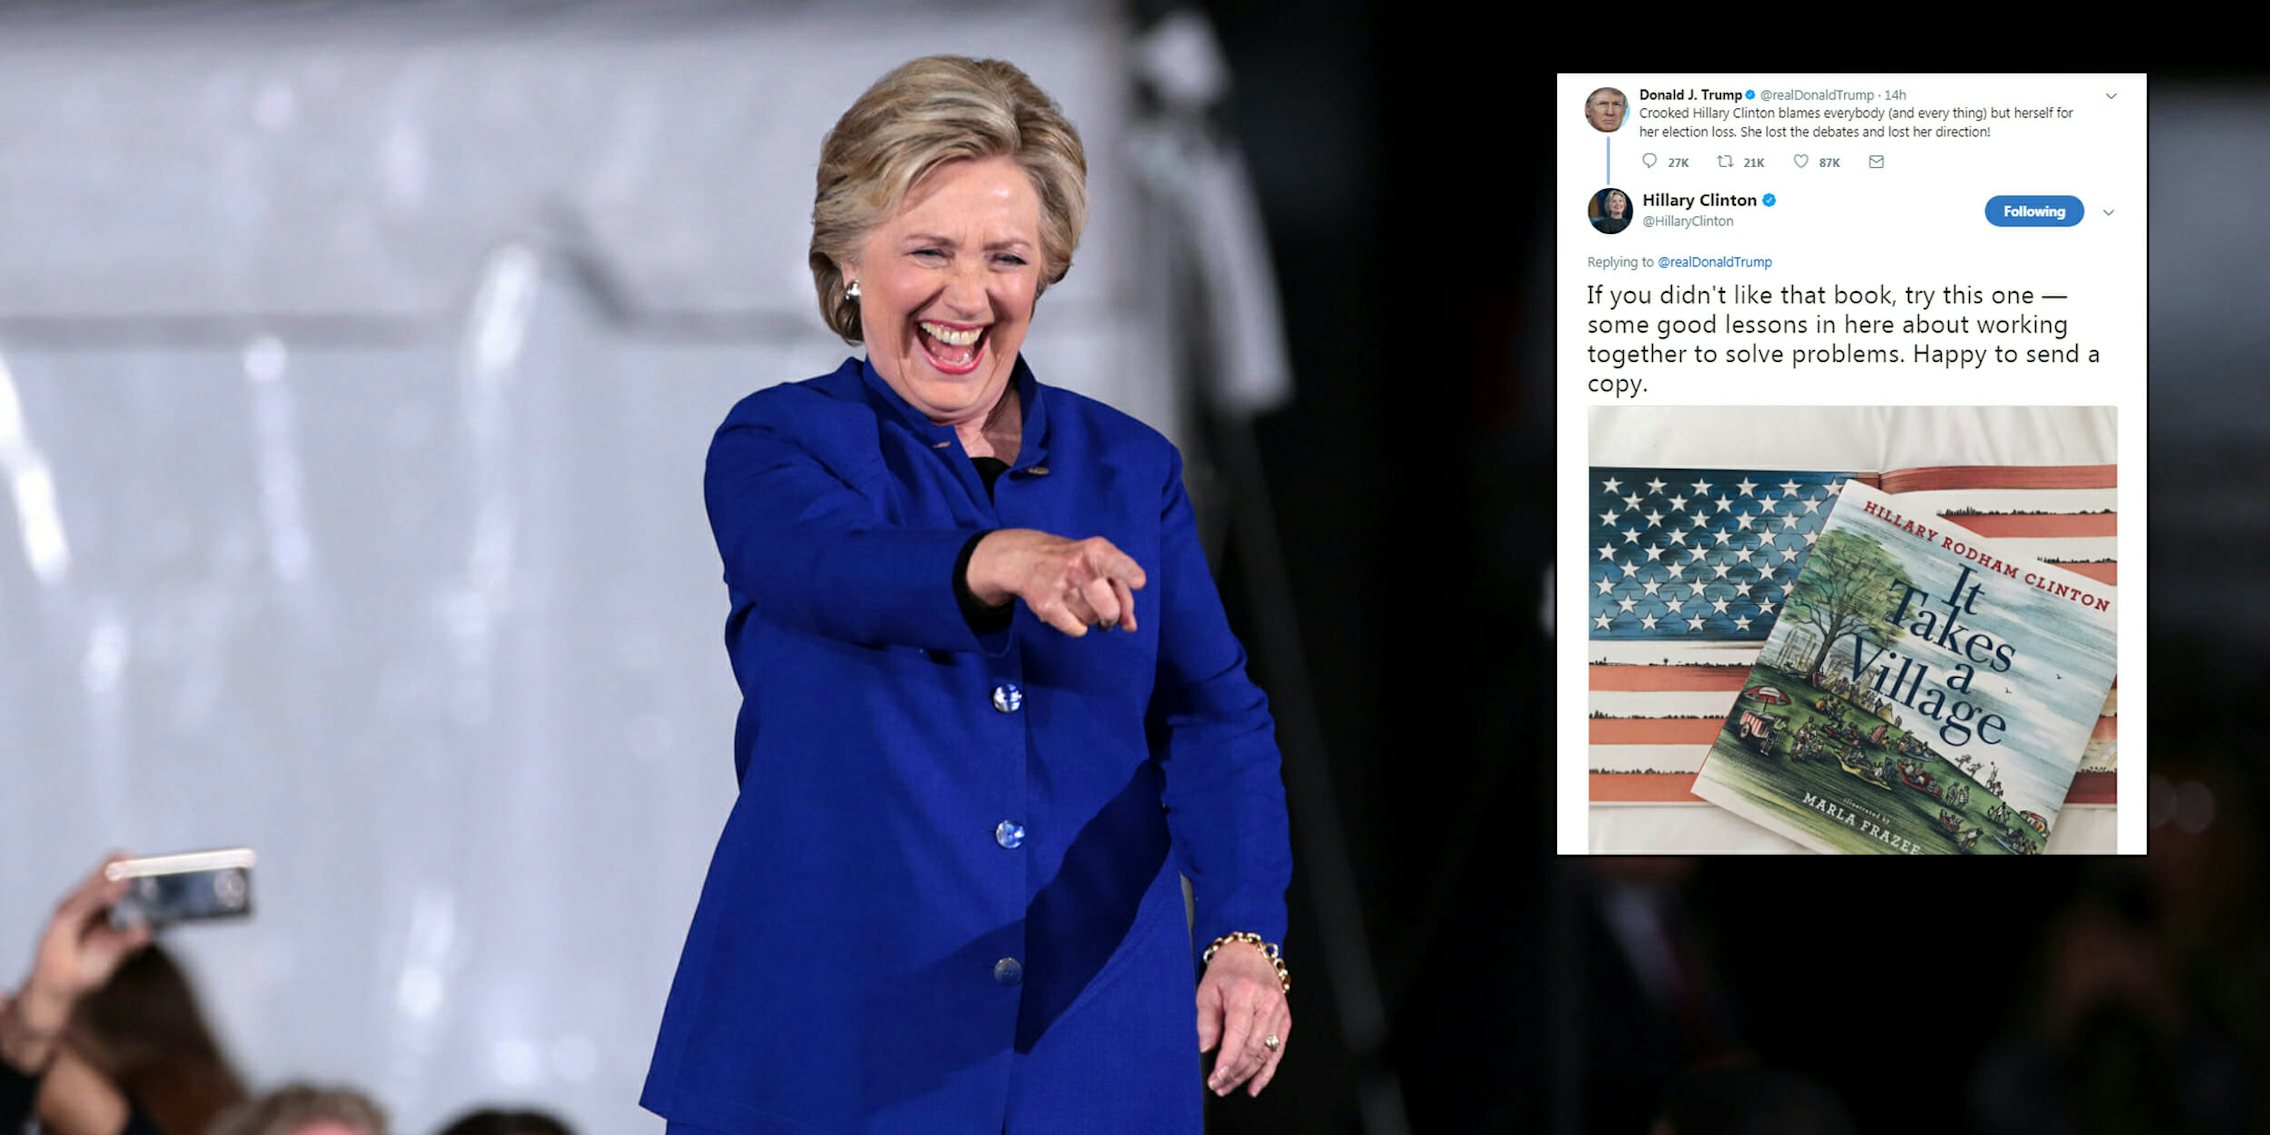 Hillary Clinton fired back after Trump attacked her on Twitter by telling him to read her illustrated children's book.